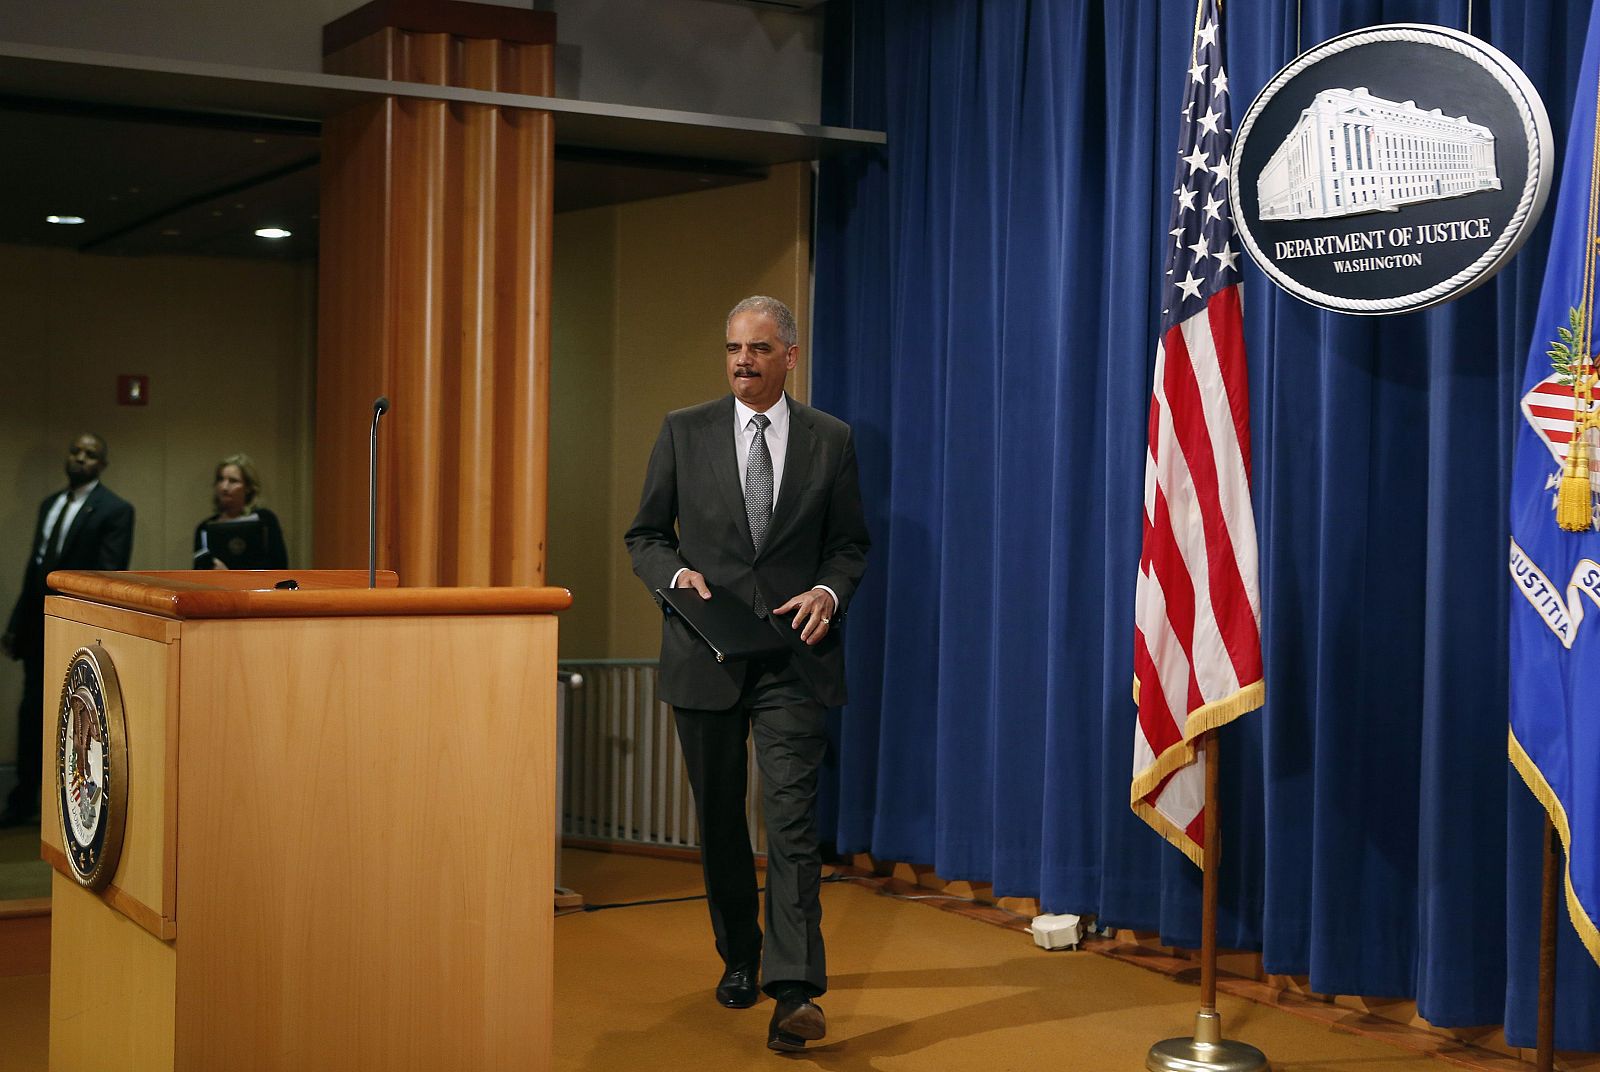 U.S. Attorney General Holder arrives to makes a statement about the grand jury decision not to seek an indictment in the Staten Island death of Eric Garner during an arrest in July, in Washington